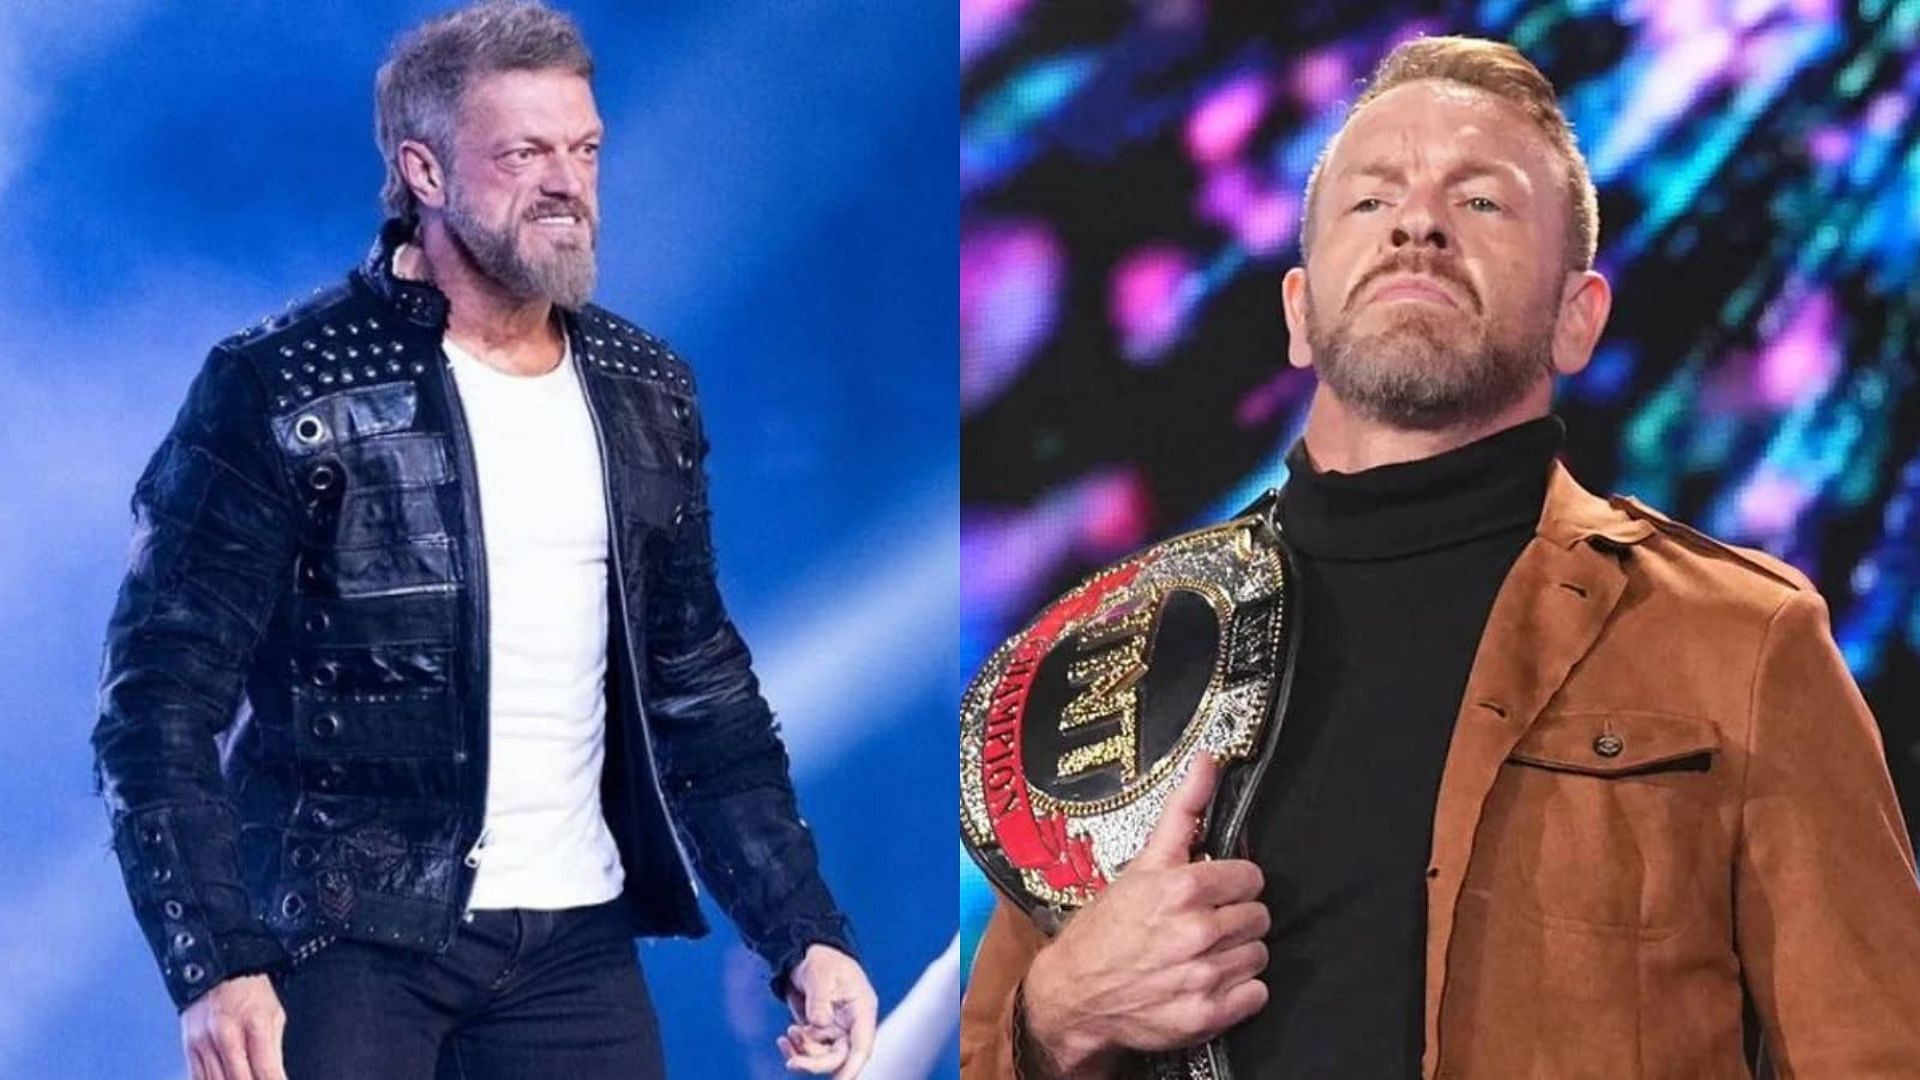 Adam Copeland and Christian Cage will finally face each other tomorrow on AEW Dynamite